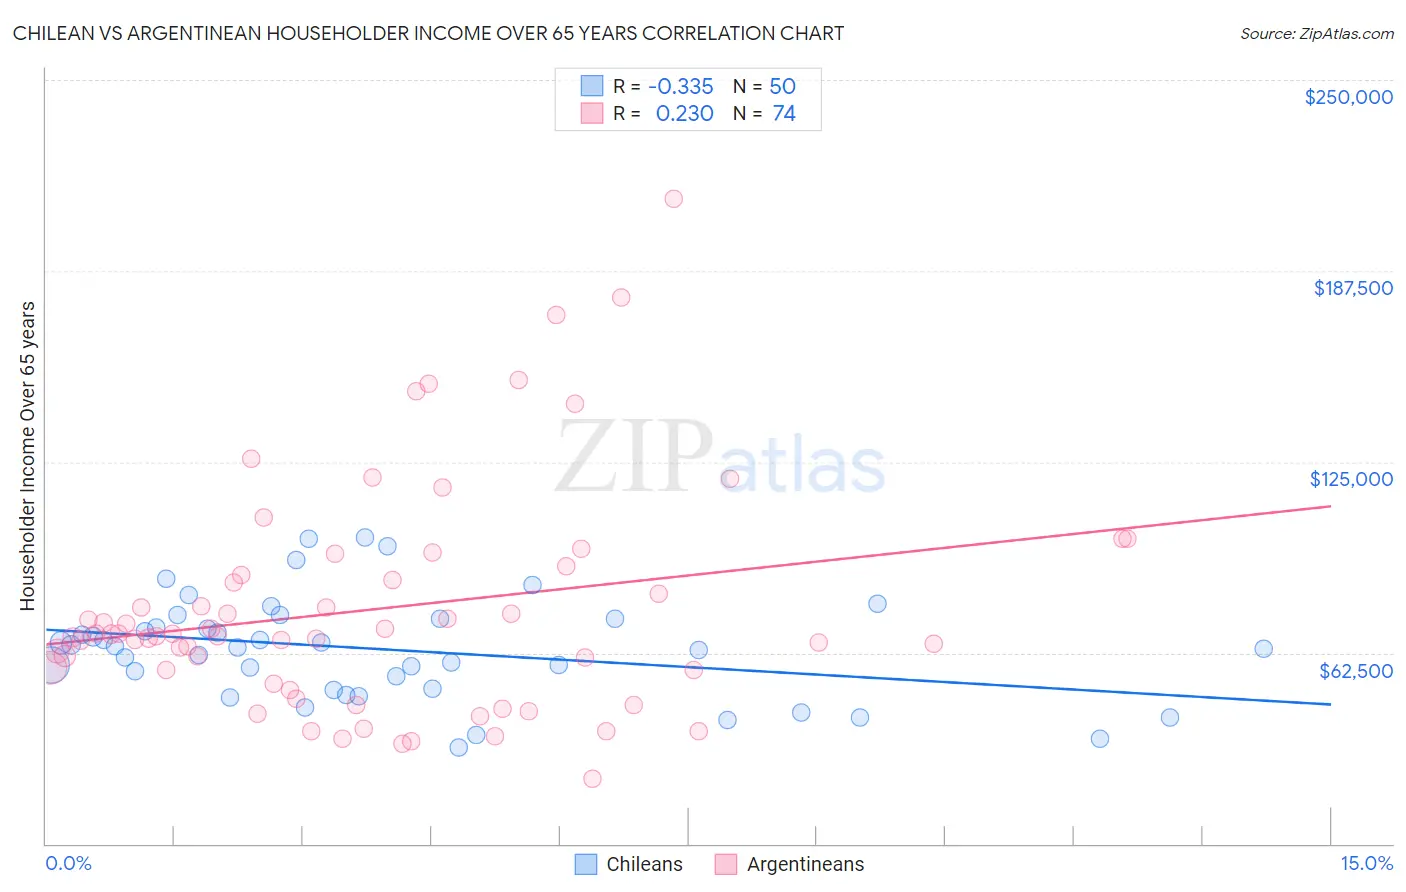 Chilean vs Argentinean Householder Income Over 65 years